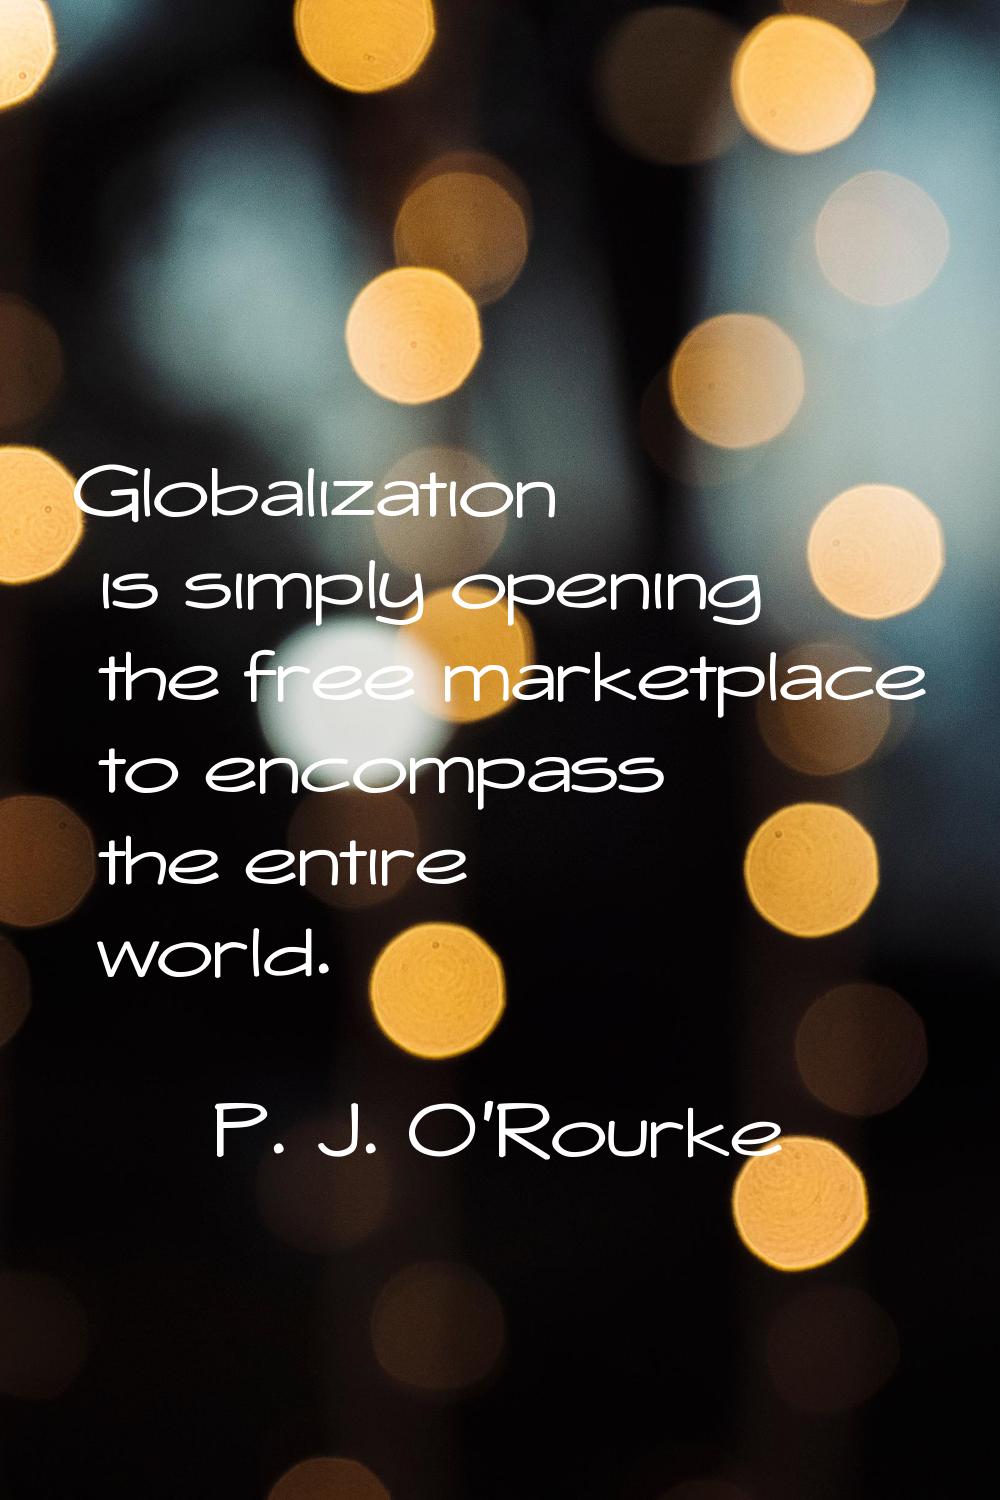 Globalization is simply opening the free marketplace to encompass the entire world.